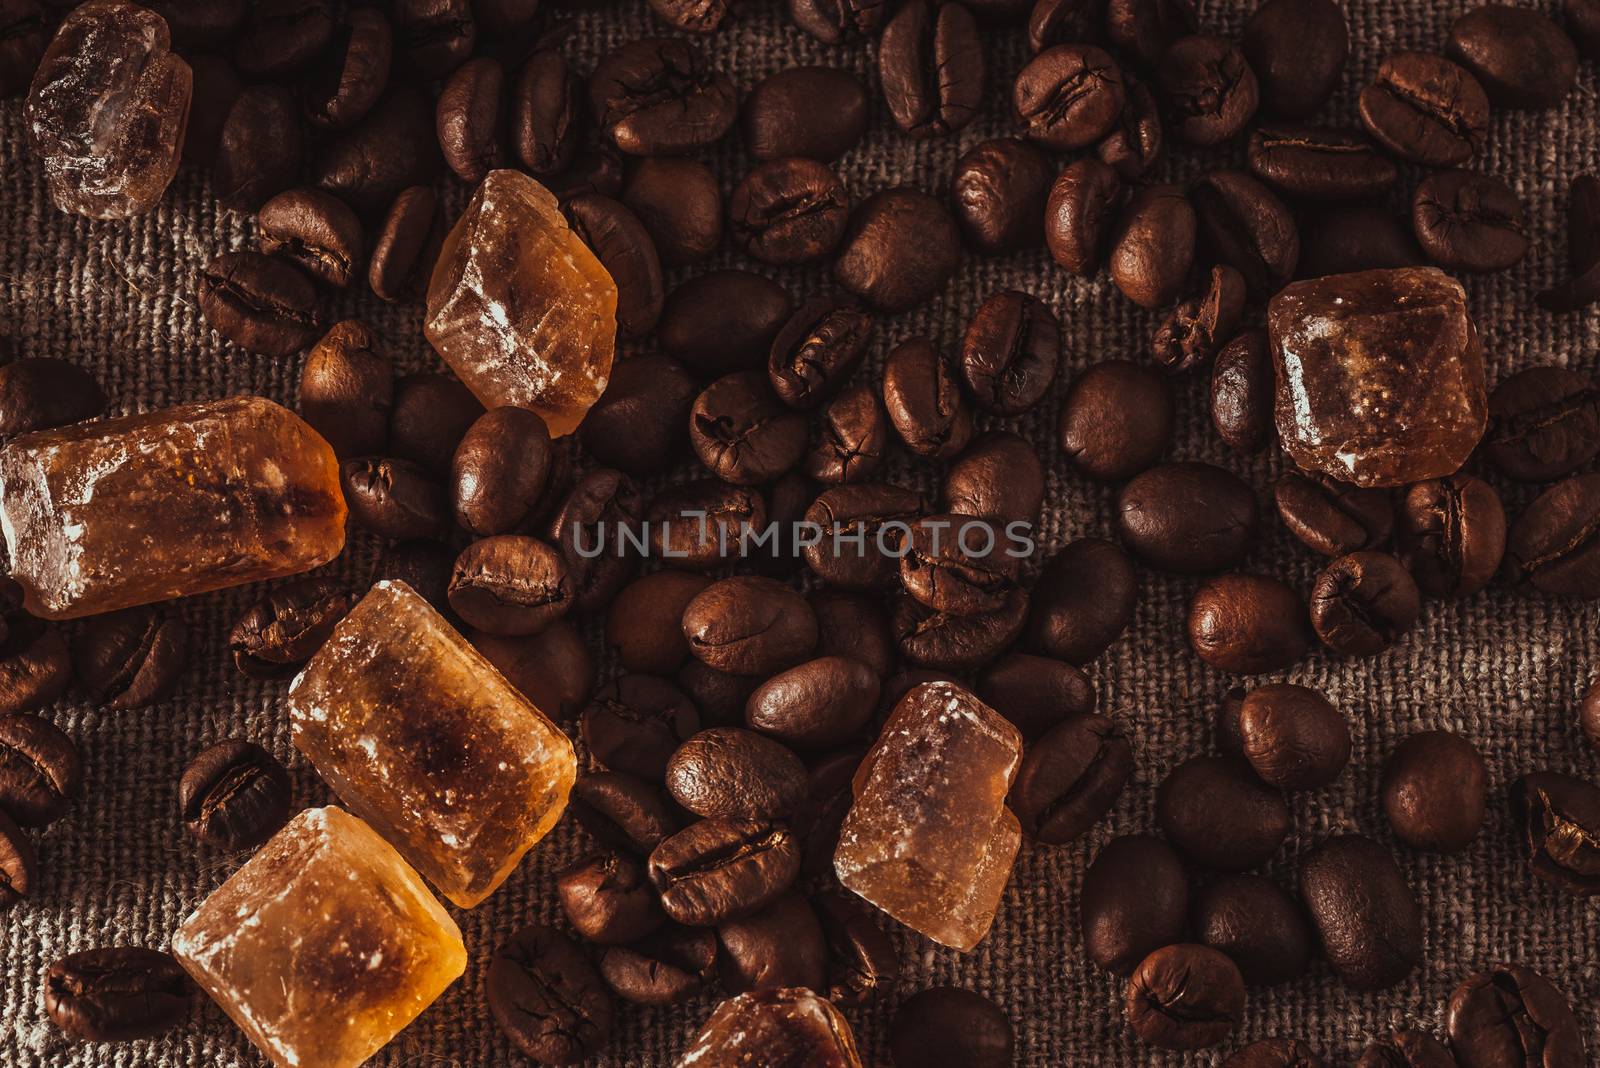 scattering of coffee beans and dark candy sugar on textile